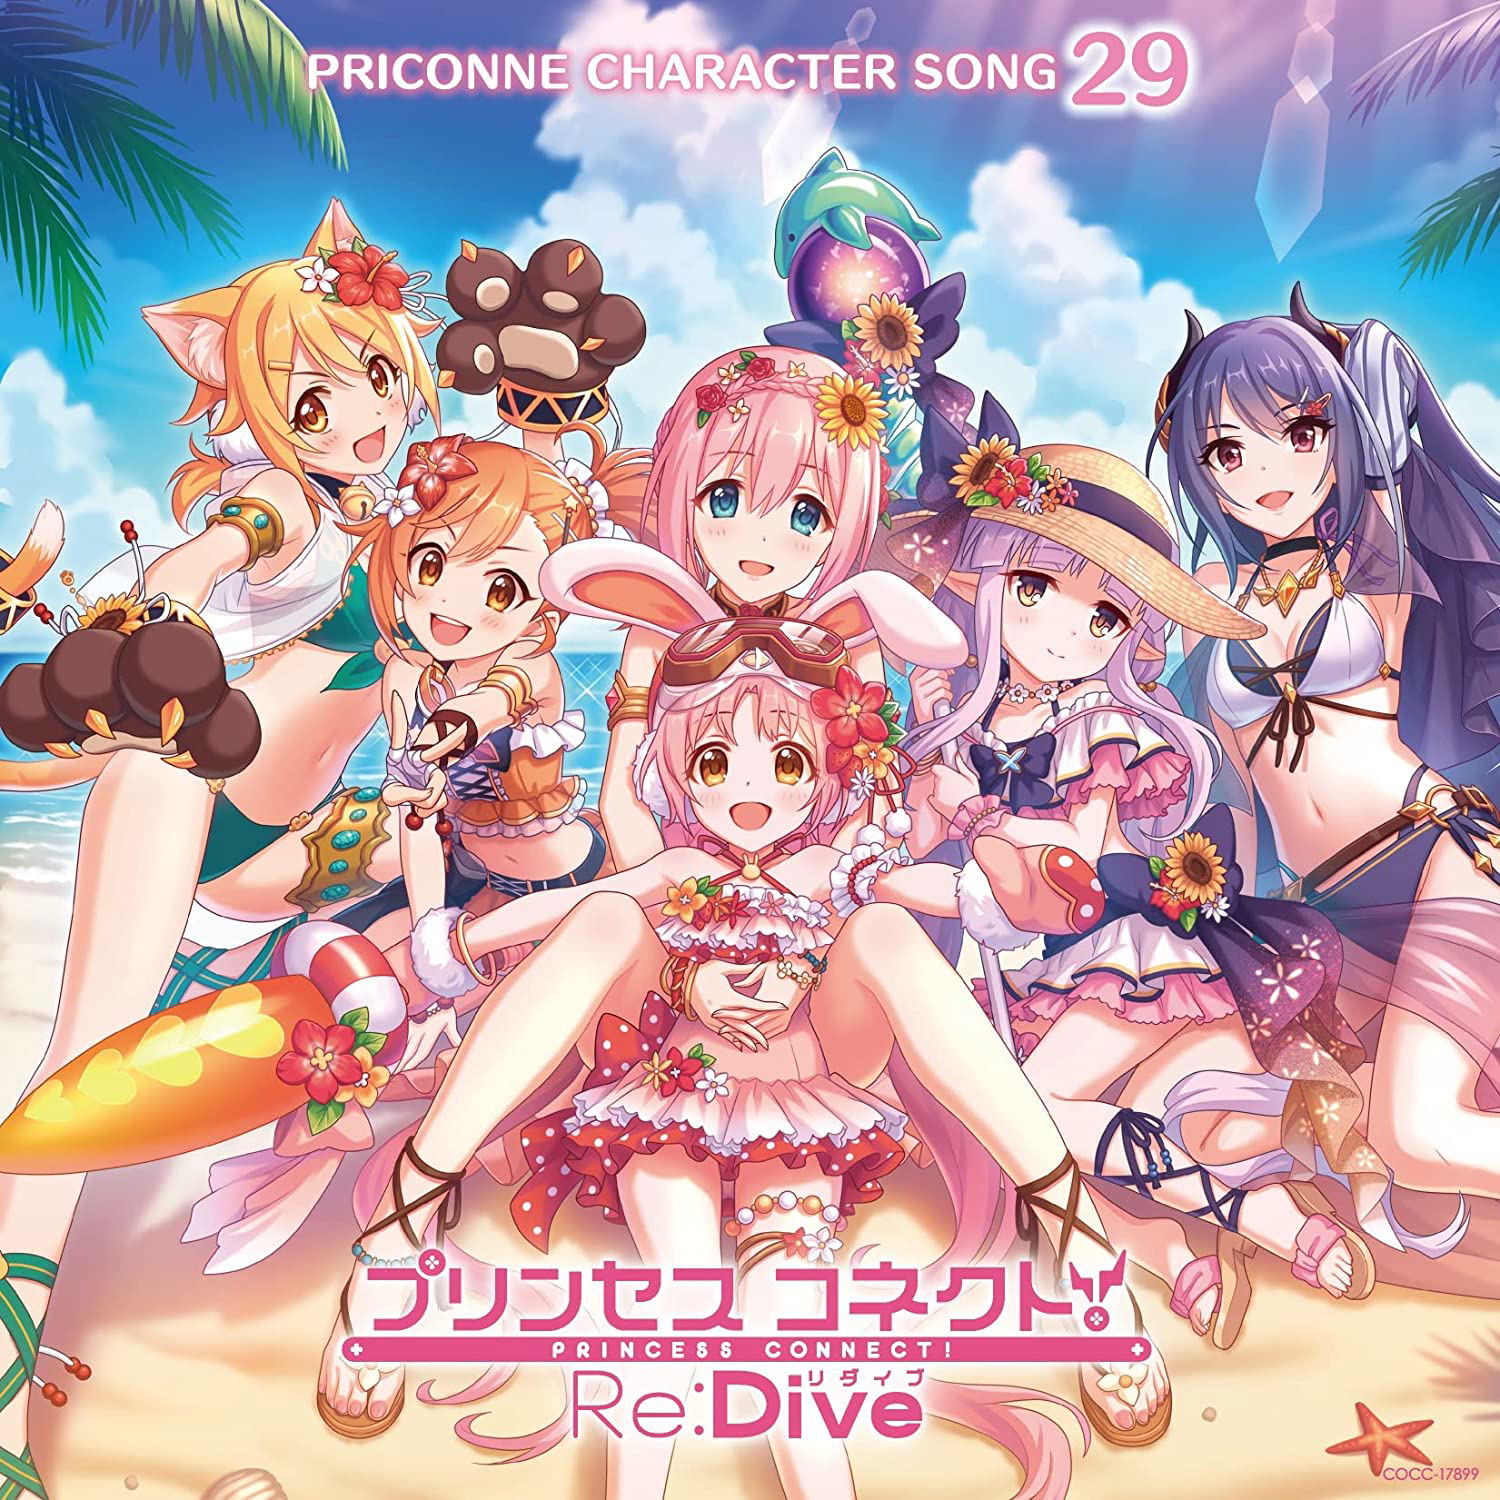 Princess Connect! Re:Dive Priconne Character Song 29 (Various Artists)